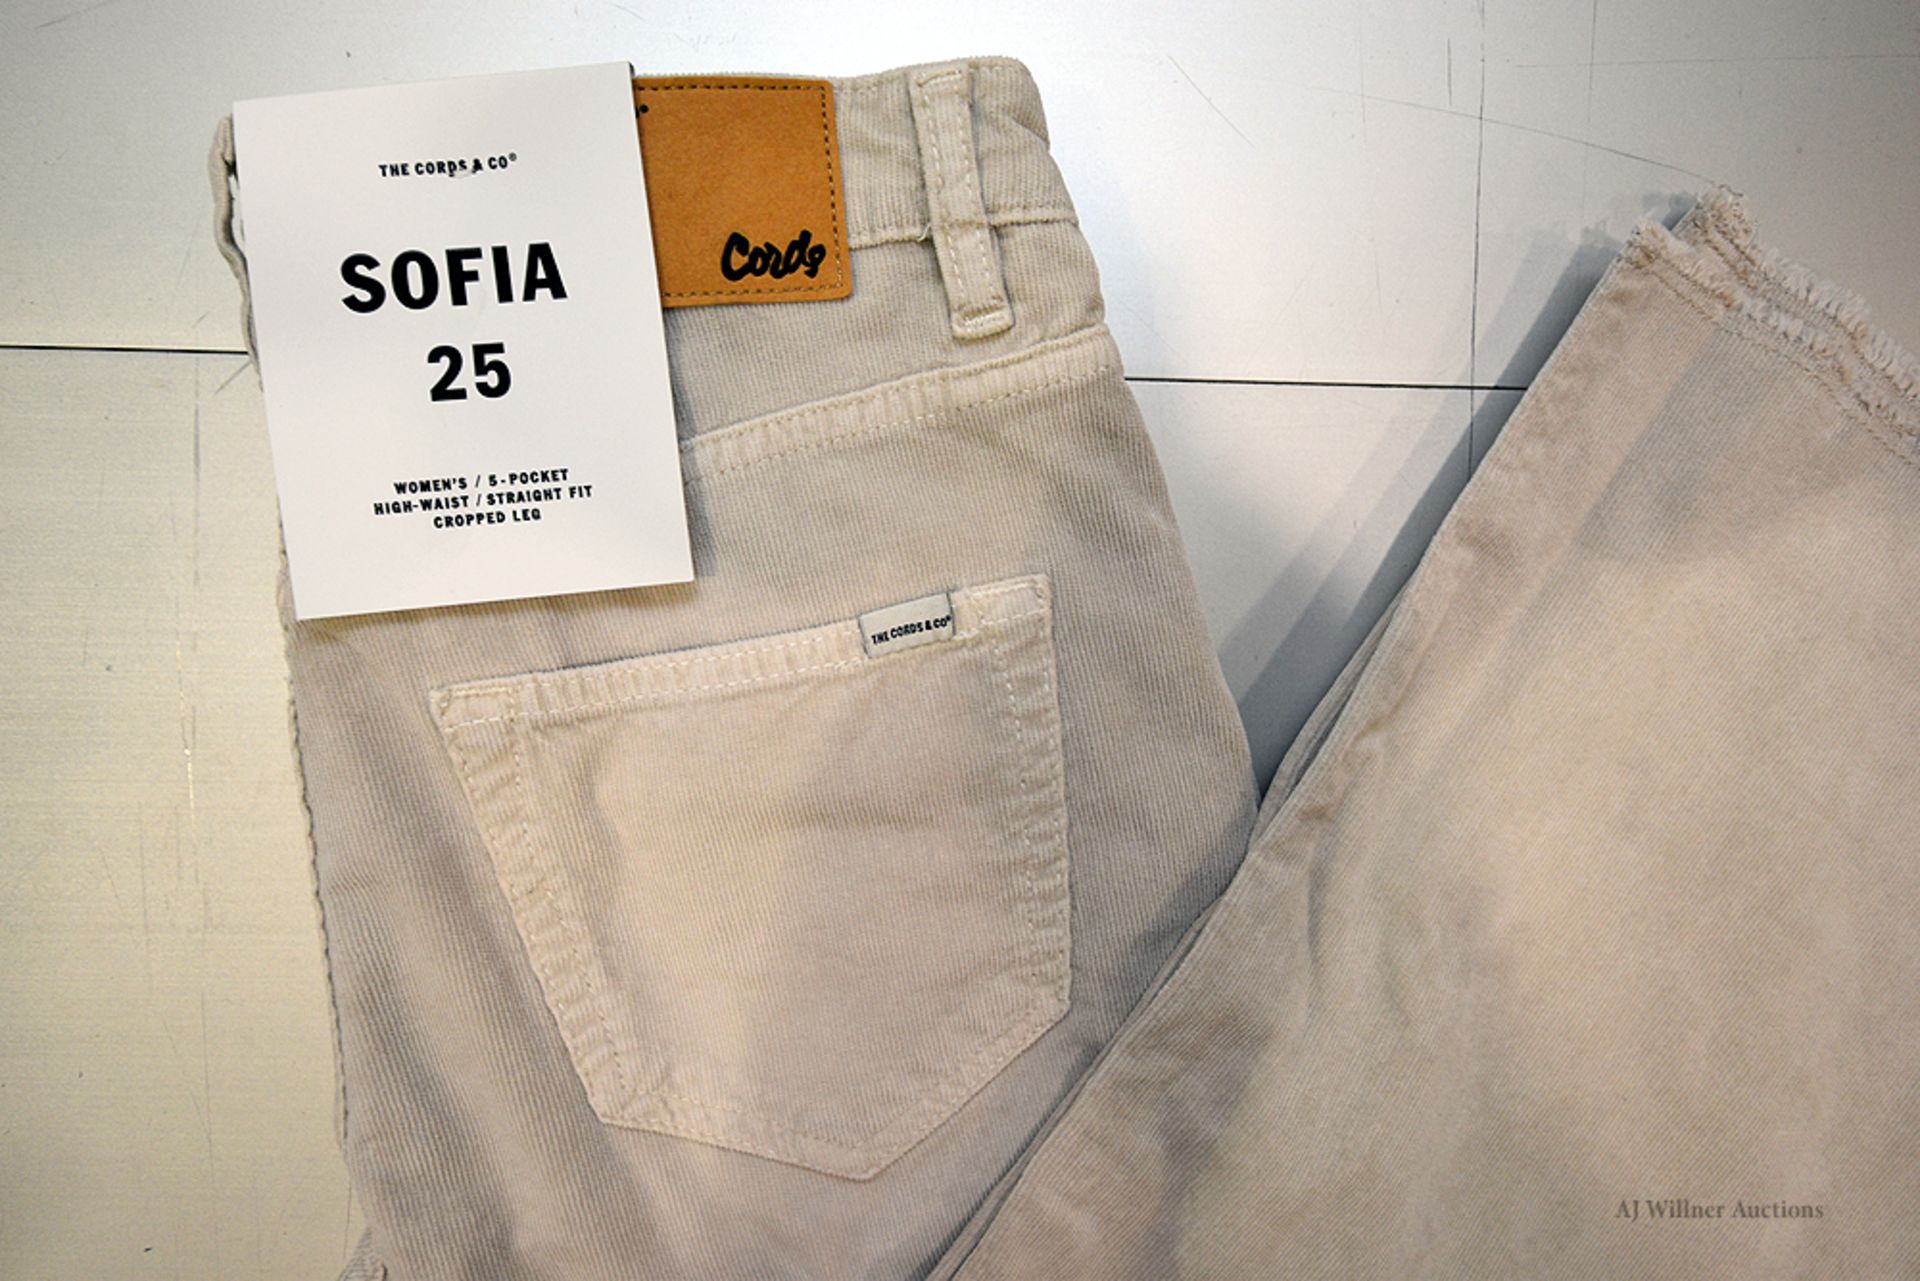 The Cords & Co. "Sofia" Style, Womens/ 5-Pocket/High-Waist/ Straight Fit/ Cropped Leg Pants(Oatmeal) - Image 2 of 3